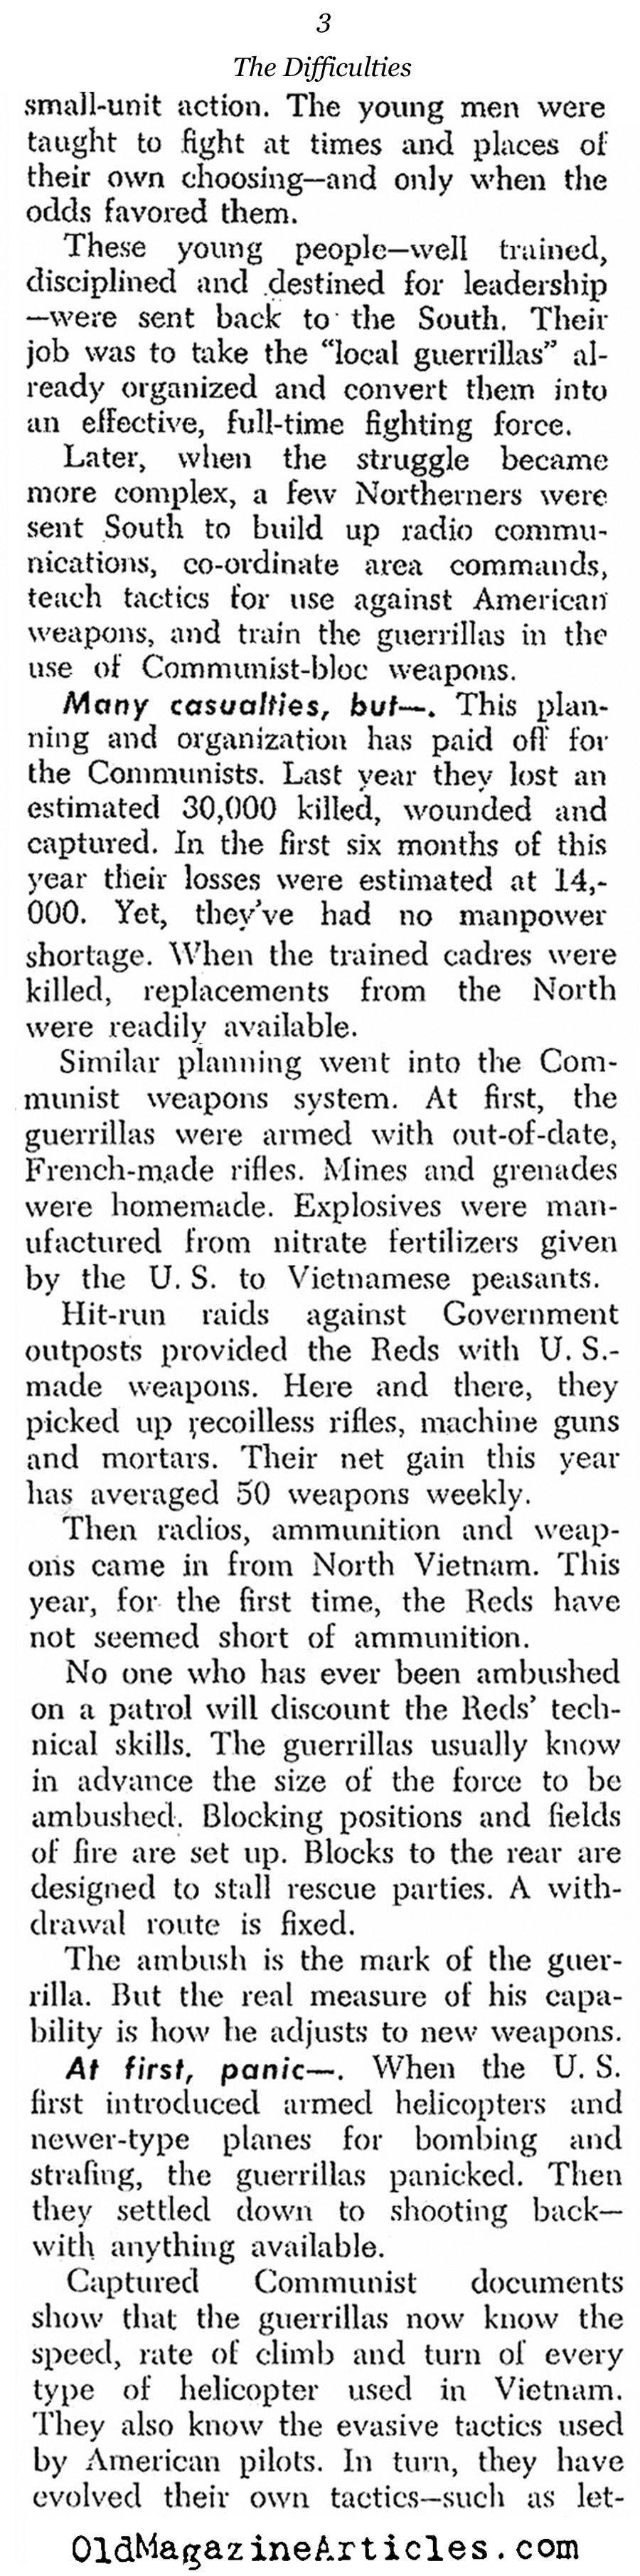 The Difficulties of This War (United States News, 1963)